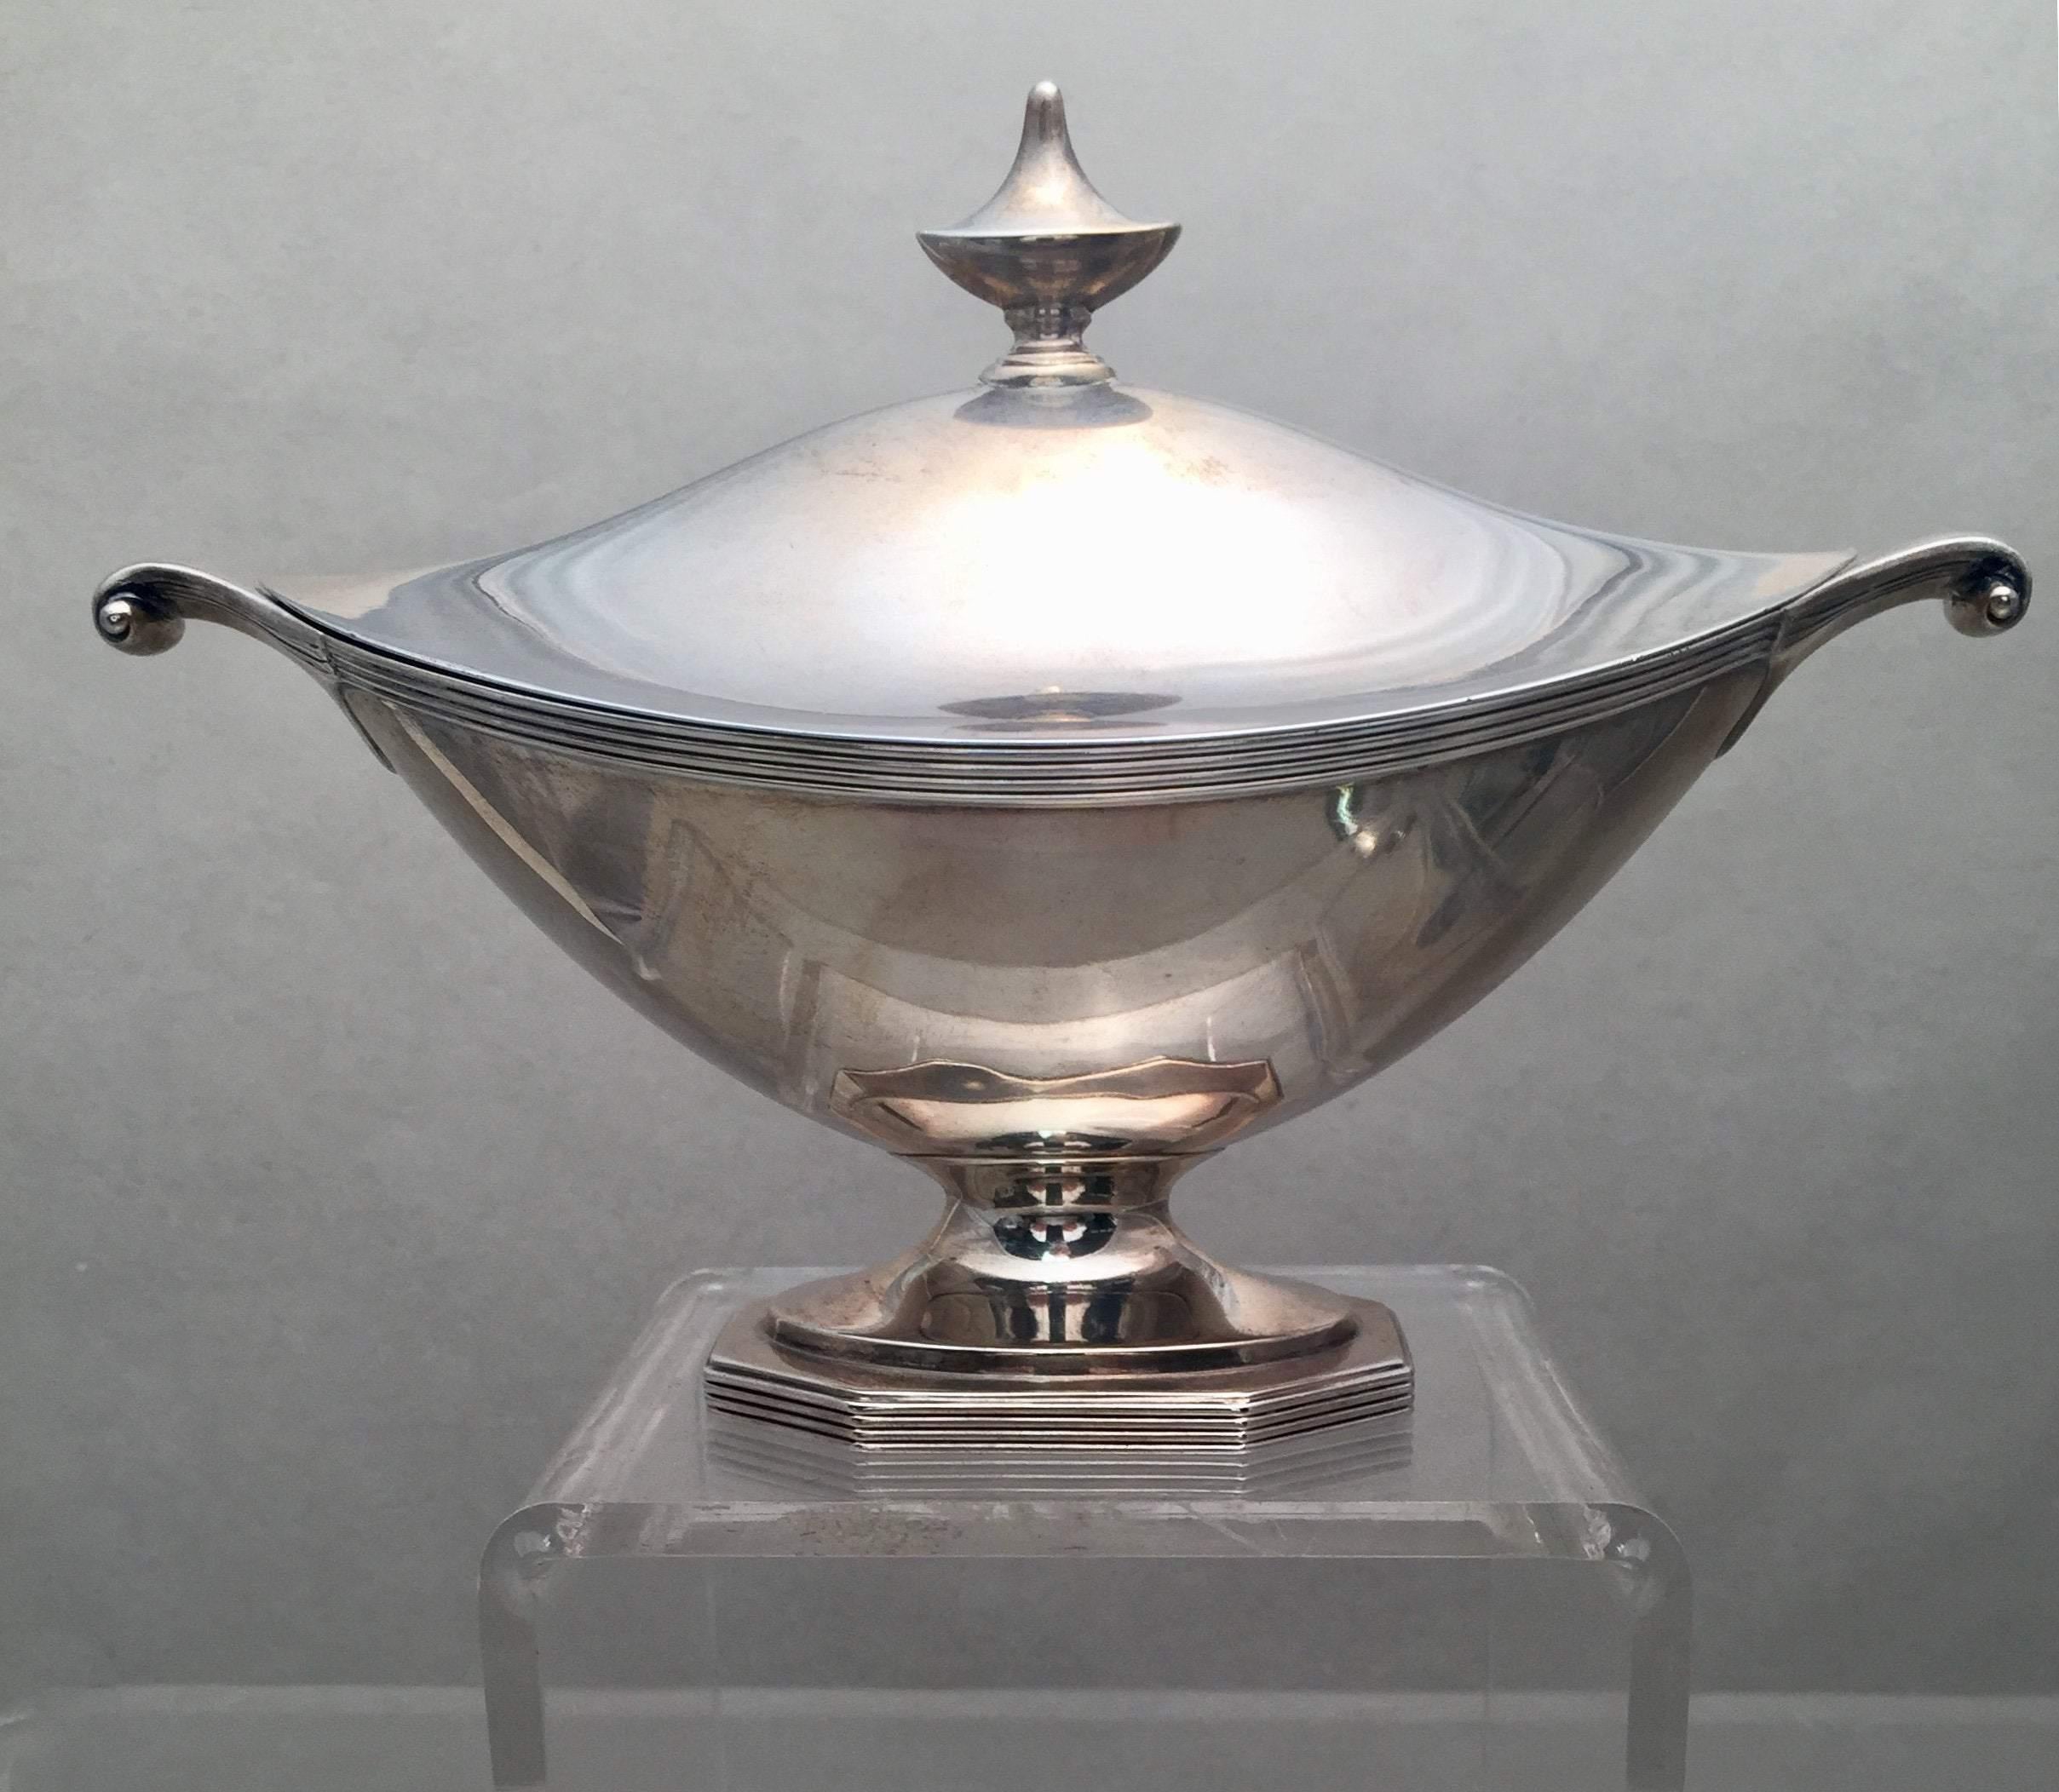 Sterling silver gravy tureen by the famous American maker Gorham in the Georgian style, shaped like Aladdin's lamp. Designed with a repetitive line pattern going around rim and base curled handles on both sides as well as a pointed finial atop.